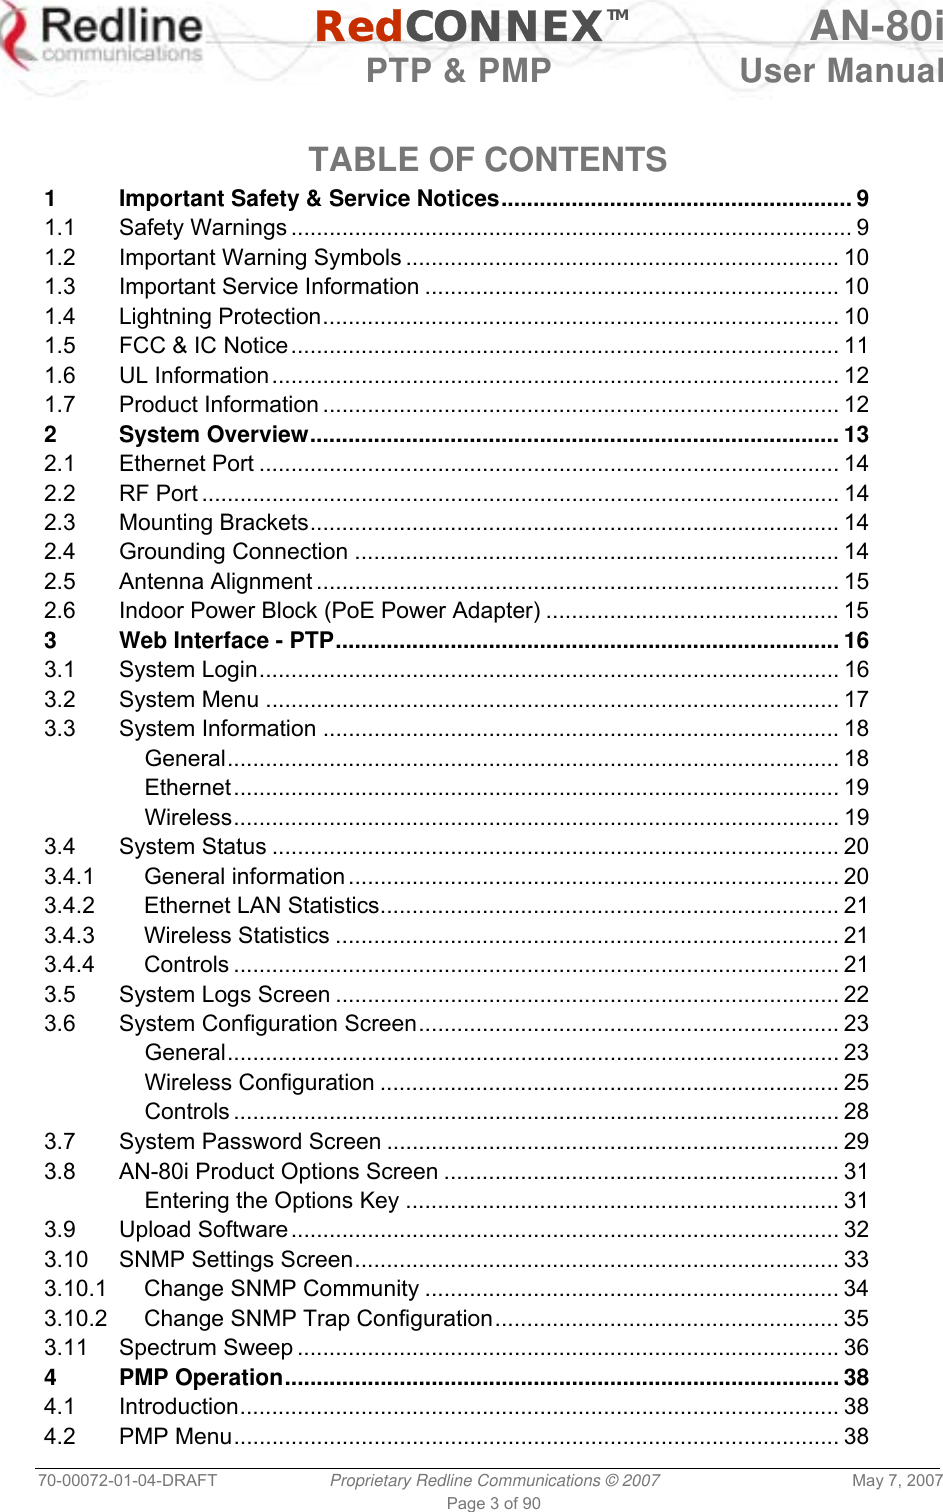   RedCONNEXTM AN-80i   PTP &amp; PMP  User Manual 70-00072-01-04-DRAFT  Proprietary Redline Communications © 2007  May 7, 2007 Page 3 of 90  TABLE OF CONTENTS 1 Important Safety &amp; Service Notices....................................................... 9 1.1 Safety Warnings ........................................................................................ 9 1.2 Important Warning Symbols .................................................................... 10 1.3 Important Service Information ................................................................. 10 1.4 Lightning Protection................................................................................. 10 1.5 FCC &amp; IC Notice...................................................................................... 11 1.6 UL Information......................................................................................... 12 1.7 Product Information ................................................................................. 12 2 System Overview................................................................................... 13 2.1 Ethernet Port ........................................................................................... 14 2.2 RF Port .................................................................................................... 14 2.3 Mounting Brackets................................................................................... 14 2.4 Grounding Connection ............................................................................ 14 2.5 Antenna Alignment .................................................................................. 15 2.6 Indoor Power Block (PoE Power Adapter) .............................................. 15 3 Web Interface - PTP............................................................................... 16 3.1 System Login........................................................................................... 16 3.2 System Menu .......................................................................................... 17 3.3 System Information ................................................................................. 18 General................................................................................................ 18 Ethernet............................................................................................... 19 Wireless............................................................................................... 19 3.4 System Status ......................................................................................... 20 3.4.1 General information ............................................................................. 20 3.4.2 Ethernet LAN Statistics........................................................................ 21 3.4.3 Wireless Statistics ............................................................................... 21 3.4.4 Controls ............................................................................................... 21 3.5 System Logs Screen ............................................................................... 22 3.6 System Configuration Screen.................................................................. 23 General................................................................................................ 23 Wireless Configuration ........................................................................ 25 Controls ............................................................................................... 28 3.7 System Password Screen ....................................................................... 29 3.8 AN-80i Product Options Screen .............................................................. 31 Entering the Options Key .................................................................... 31 3.9 Upload Software...................................................................................... 32 3.10 SNMP Settings Screen............................................................................ 33 3.10.1 Change SNMP Community ................................................................. 34 3.10.2 Change SNMP Trap Configuration...................................................... 35 3.11 Spectrum Sweep ..................................................................................... 36 4 PMP Operation....................................................................................... 38 4.1 Introduction.............................................................................................. 38 4.2 PMP Menu............................................................................................... 38 